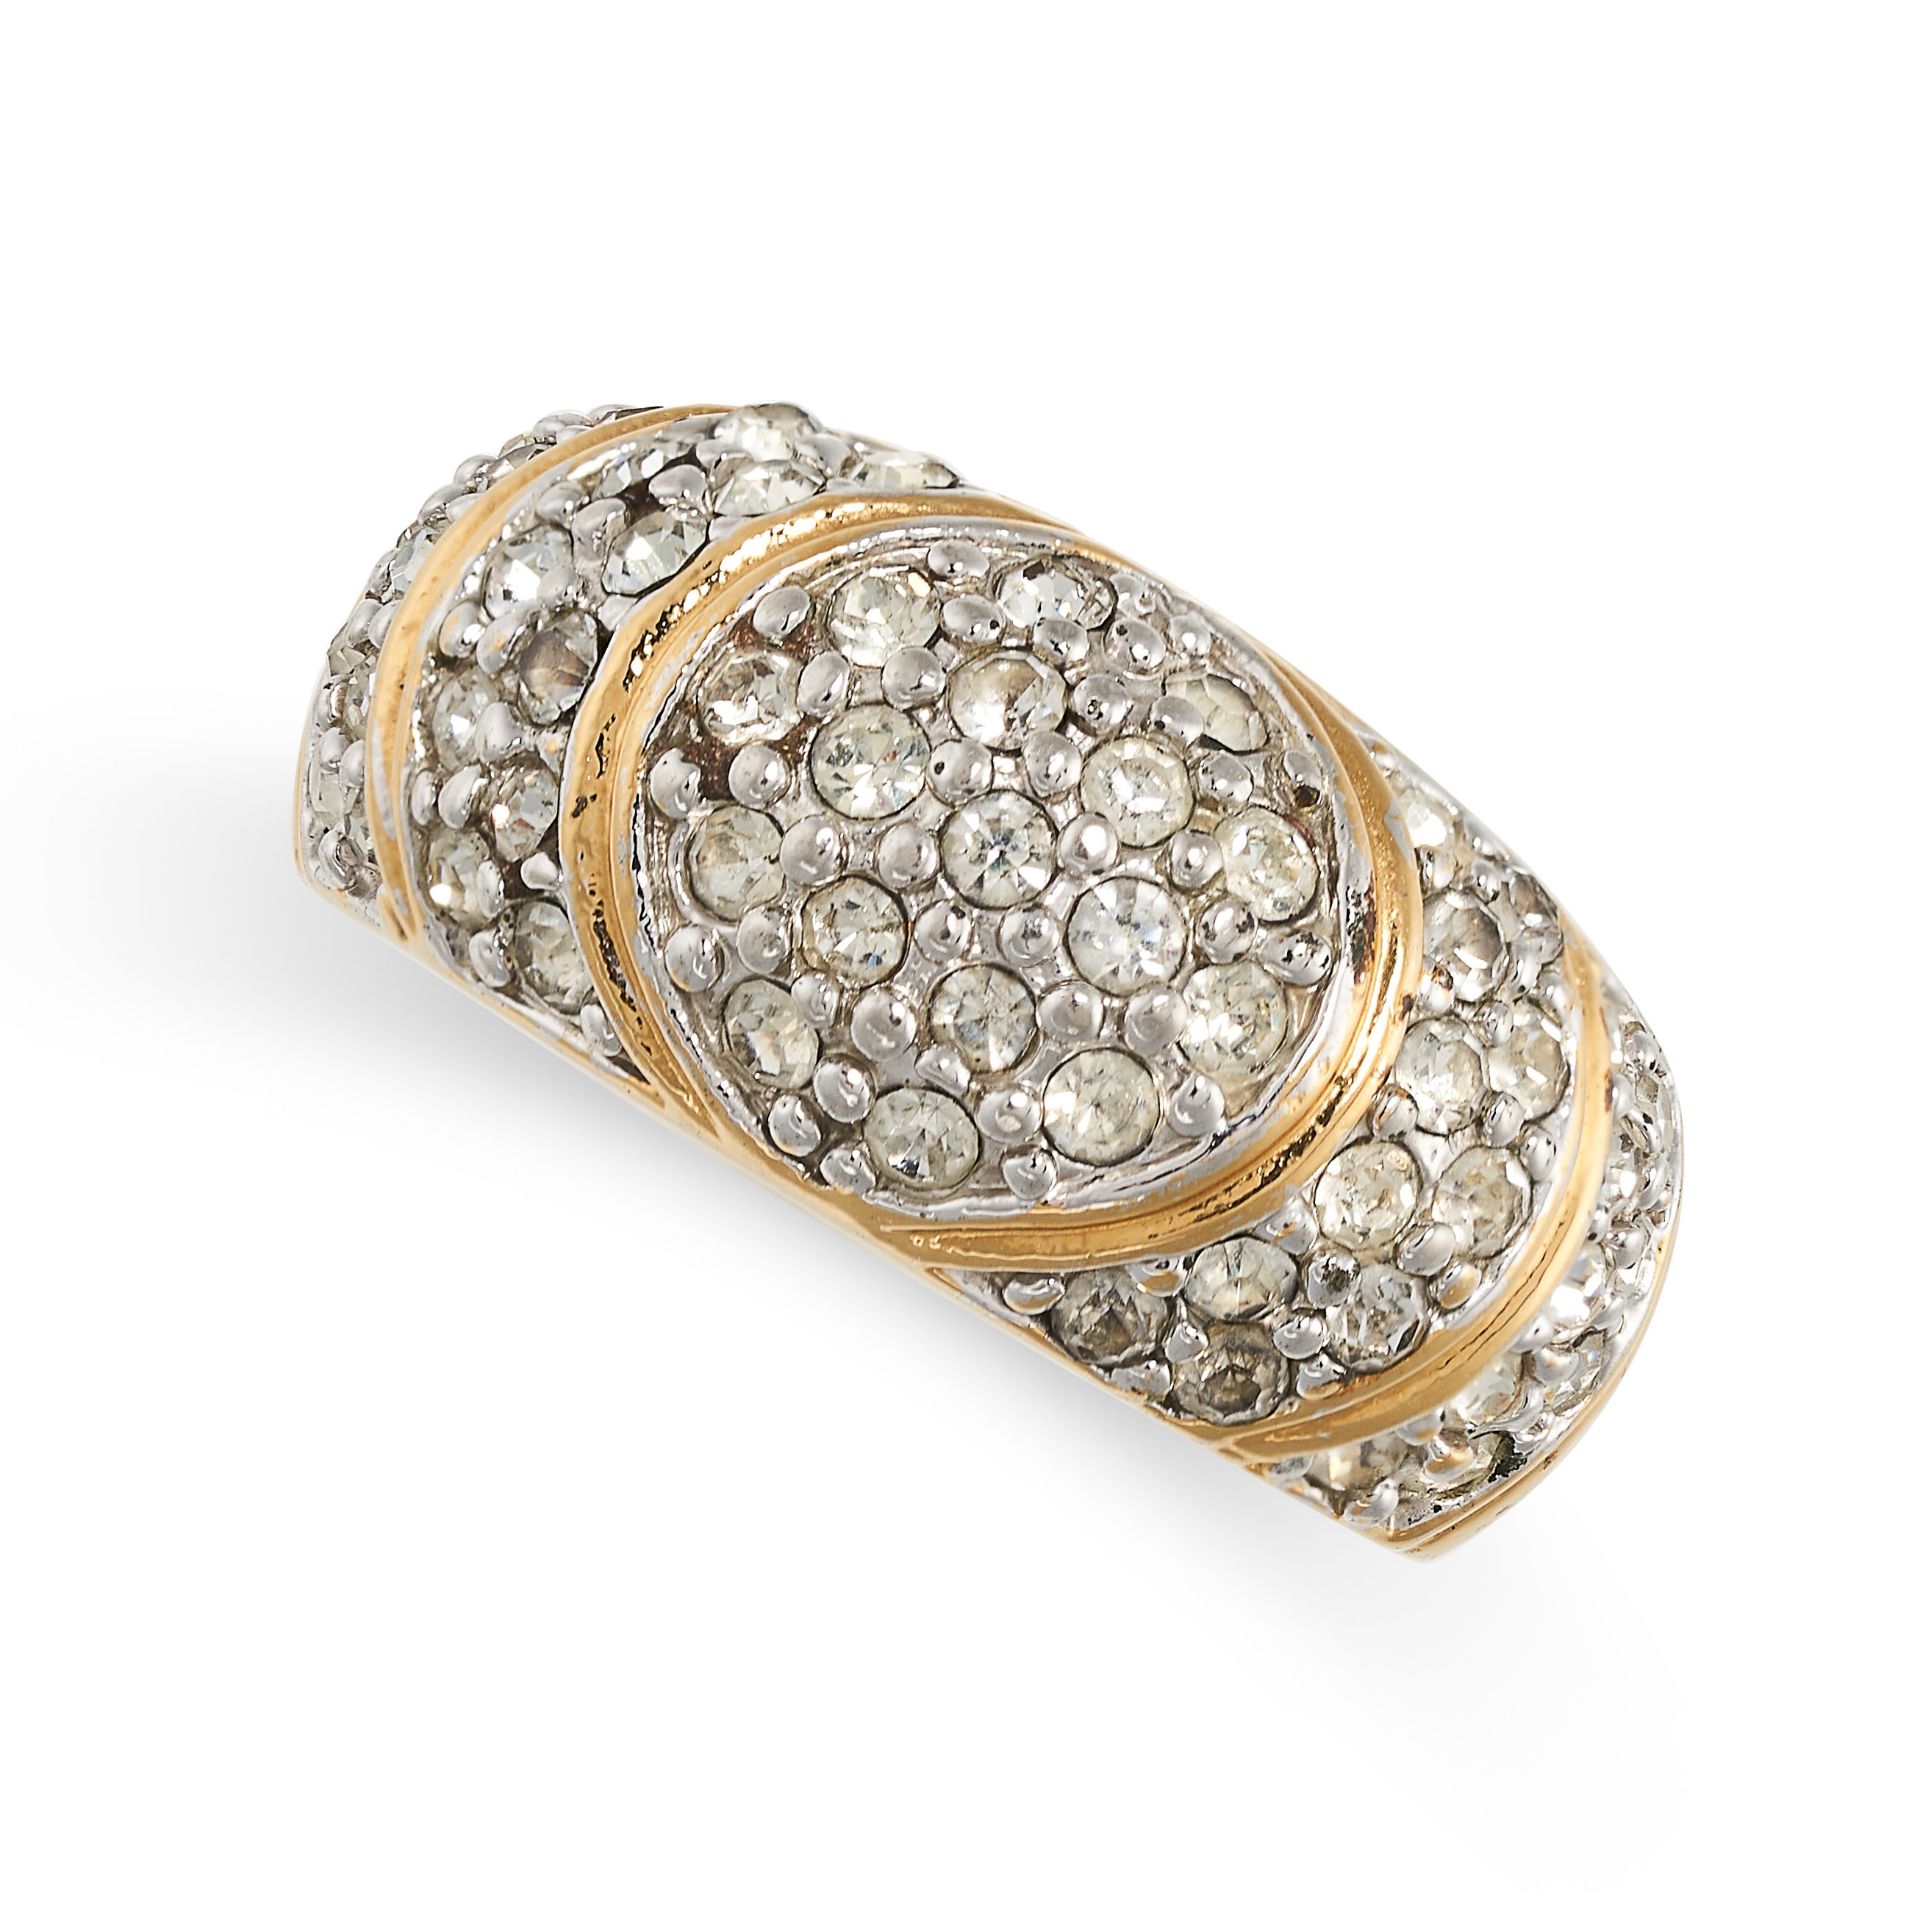 A VINTAGE WHITE GEMSTONE RING in 14ct gold, the bombe face is pave set with round cut white paste